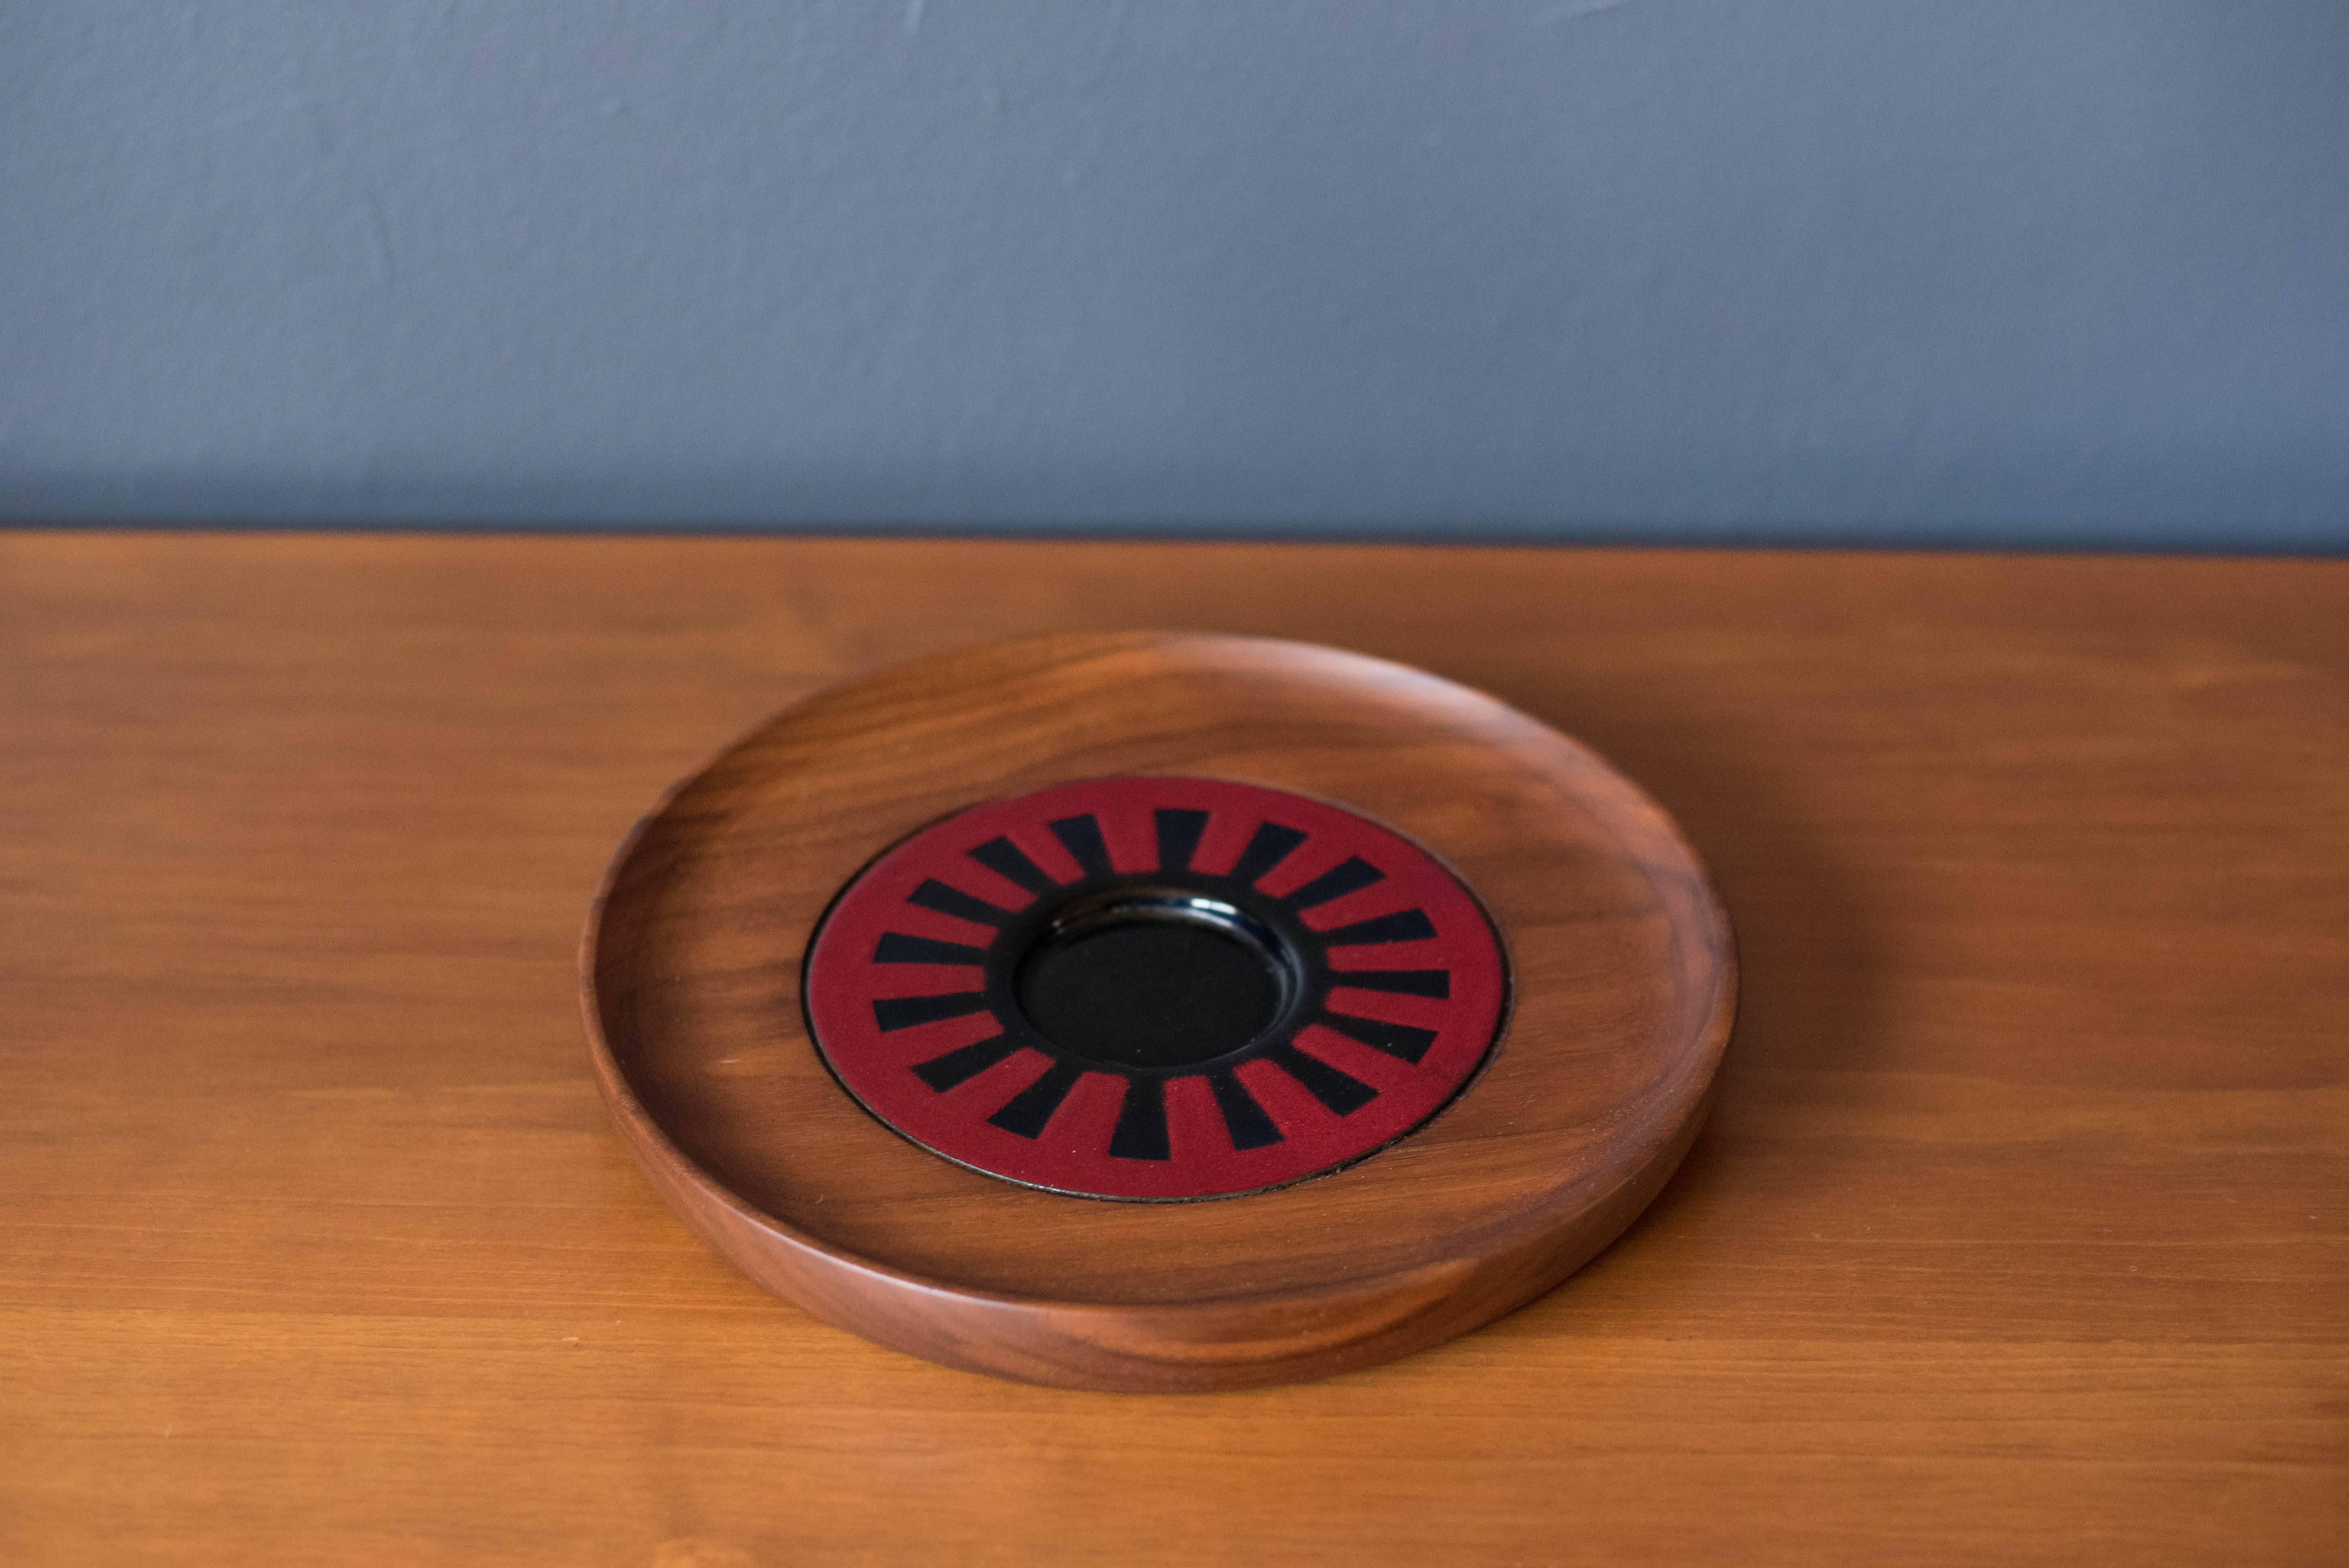 Vintage decorative serving dish designed by Richard Grossenbach for Raymor. This hand-turned walnut piece features sculptural raised edges and a vibrant ceramic insert.